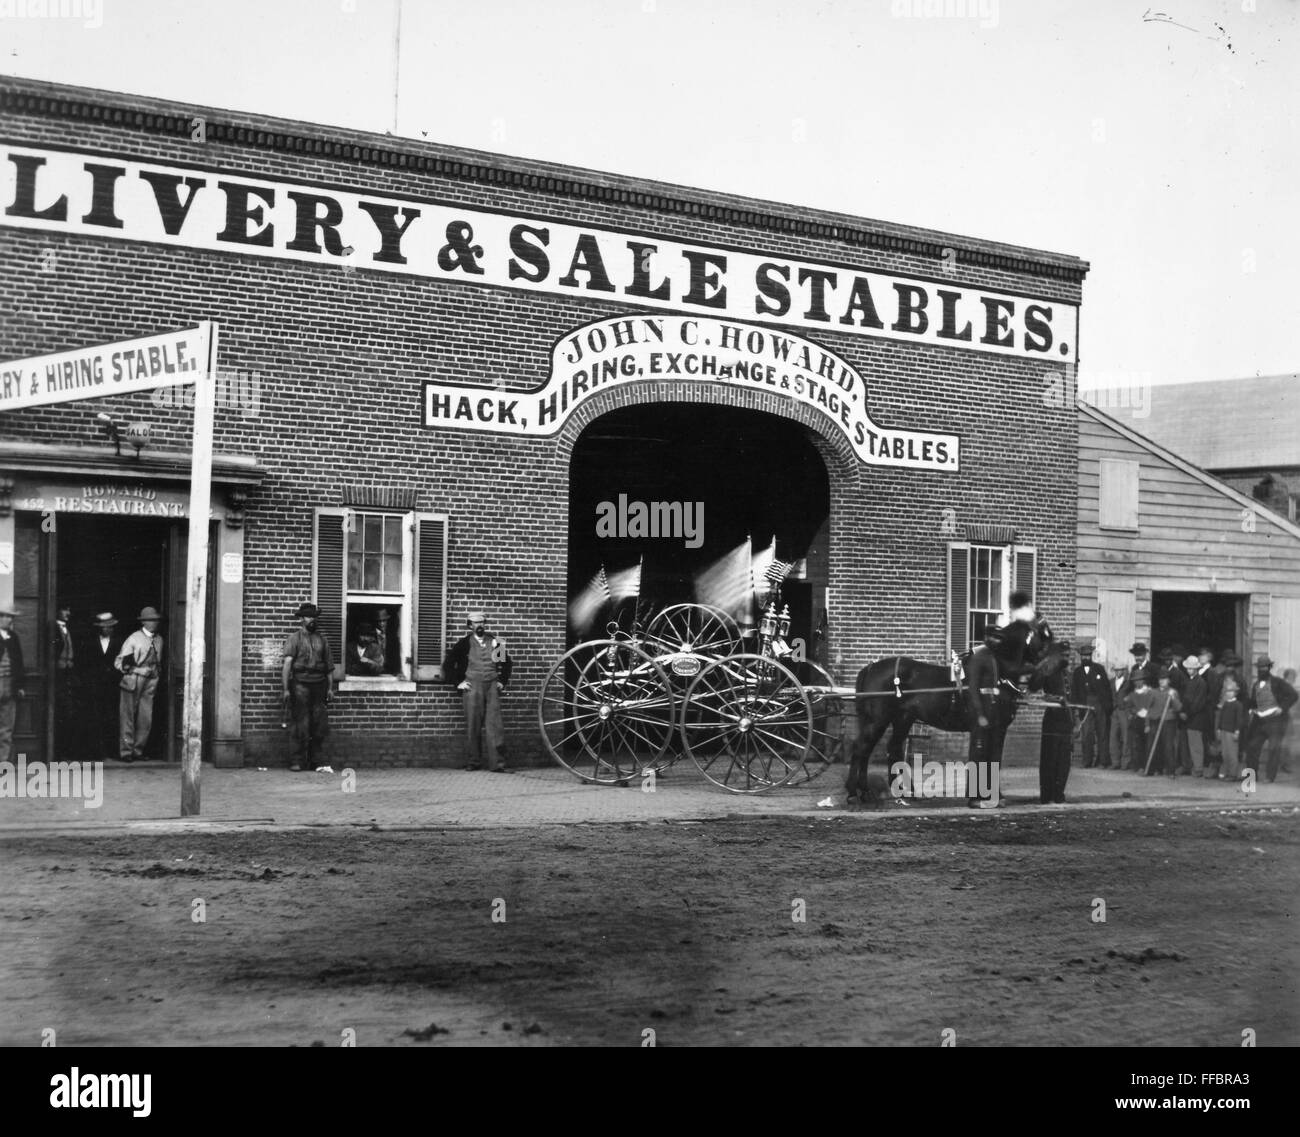 WASHINGTON: STABLES, 1865. /nJohn C. Howard's livery stable and saloon on G Street in Washington, D.C., where John H. Surratt, a conspirator in the Abraham Lincoln assassination, kept horses before leaving town on 1 April 1865. At right is a horse drawn h Stock Photo